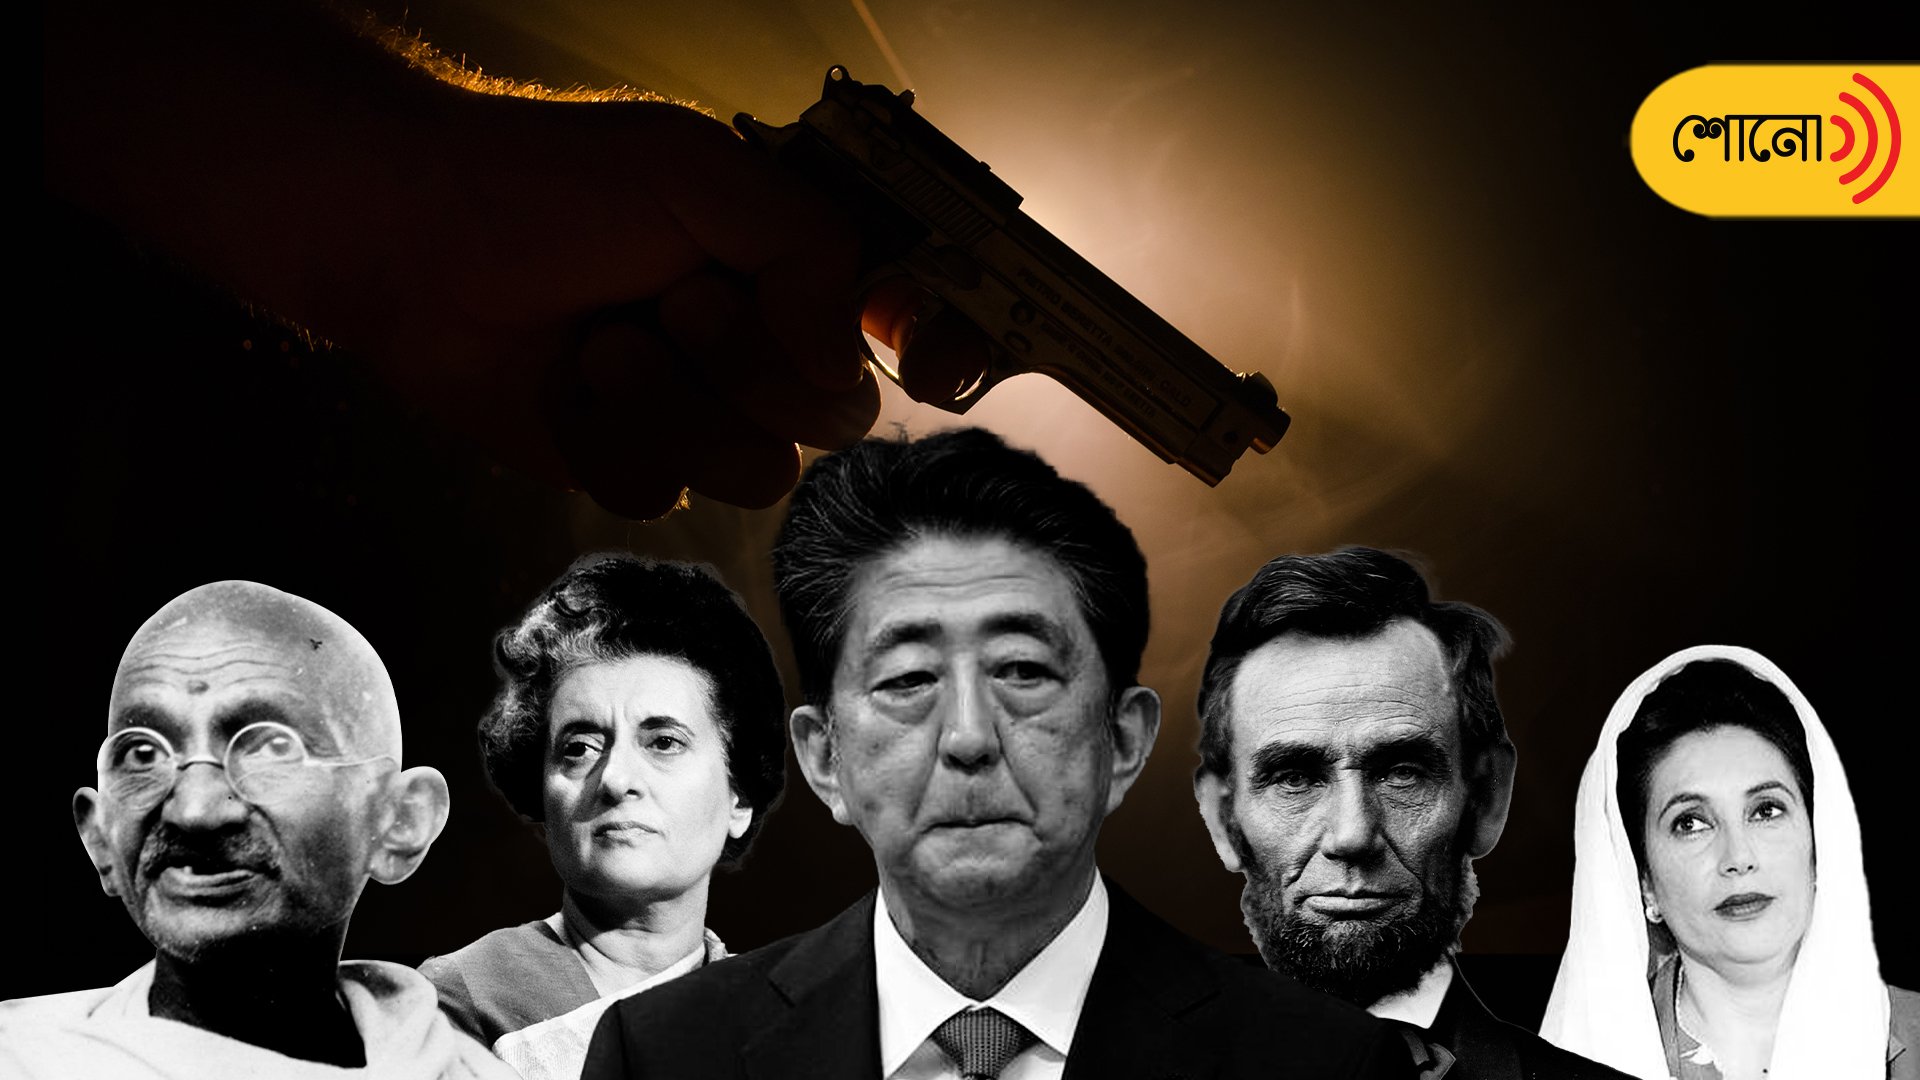 not only Shinzo Abe, many political leaders were dead by assassins